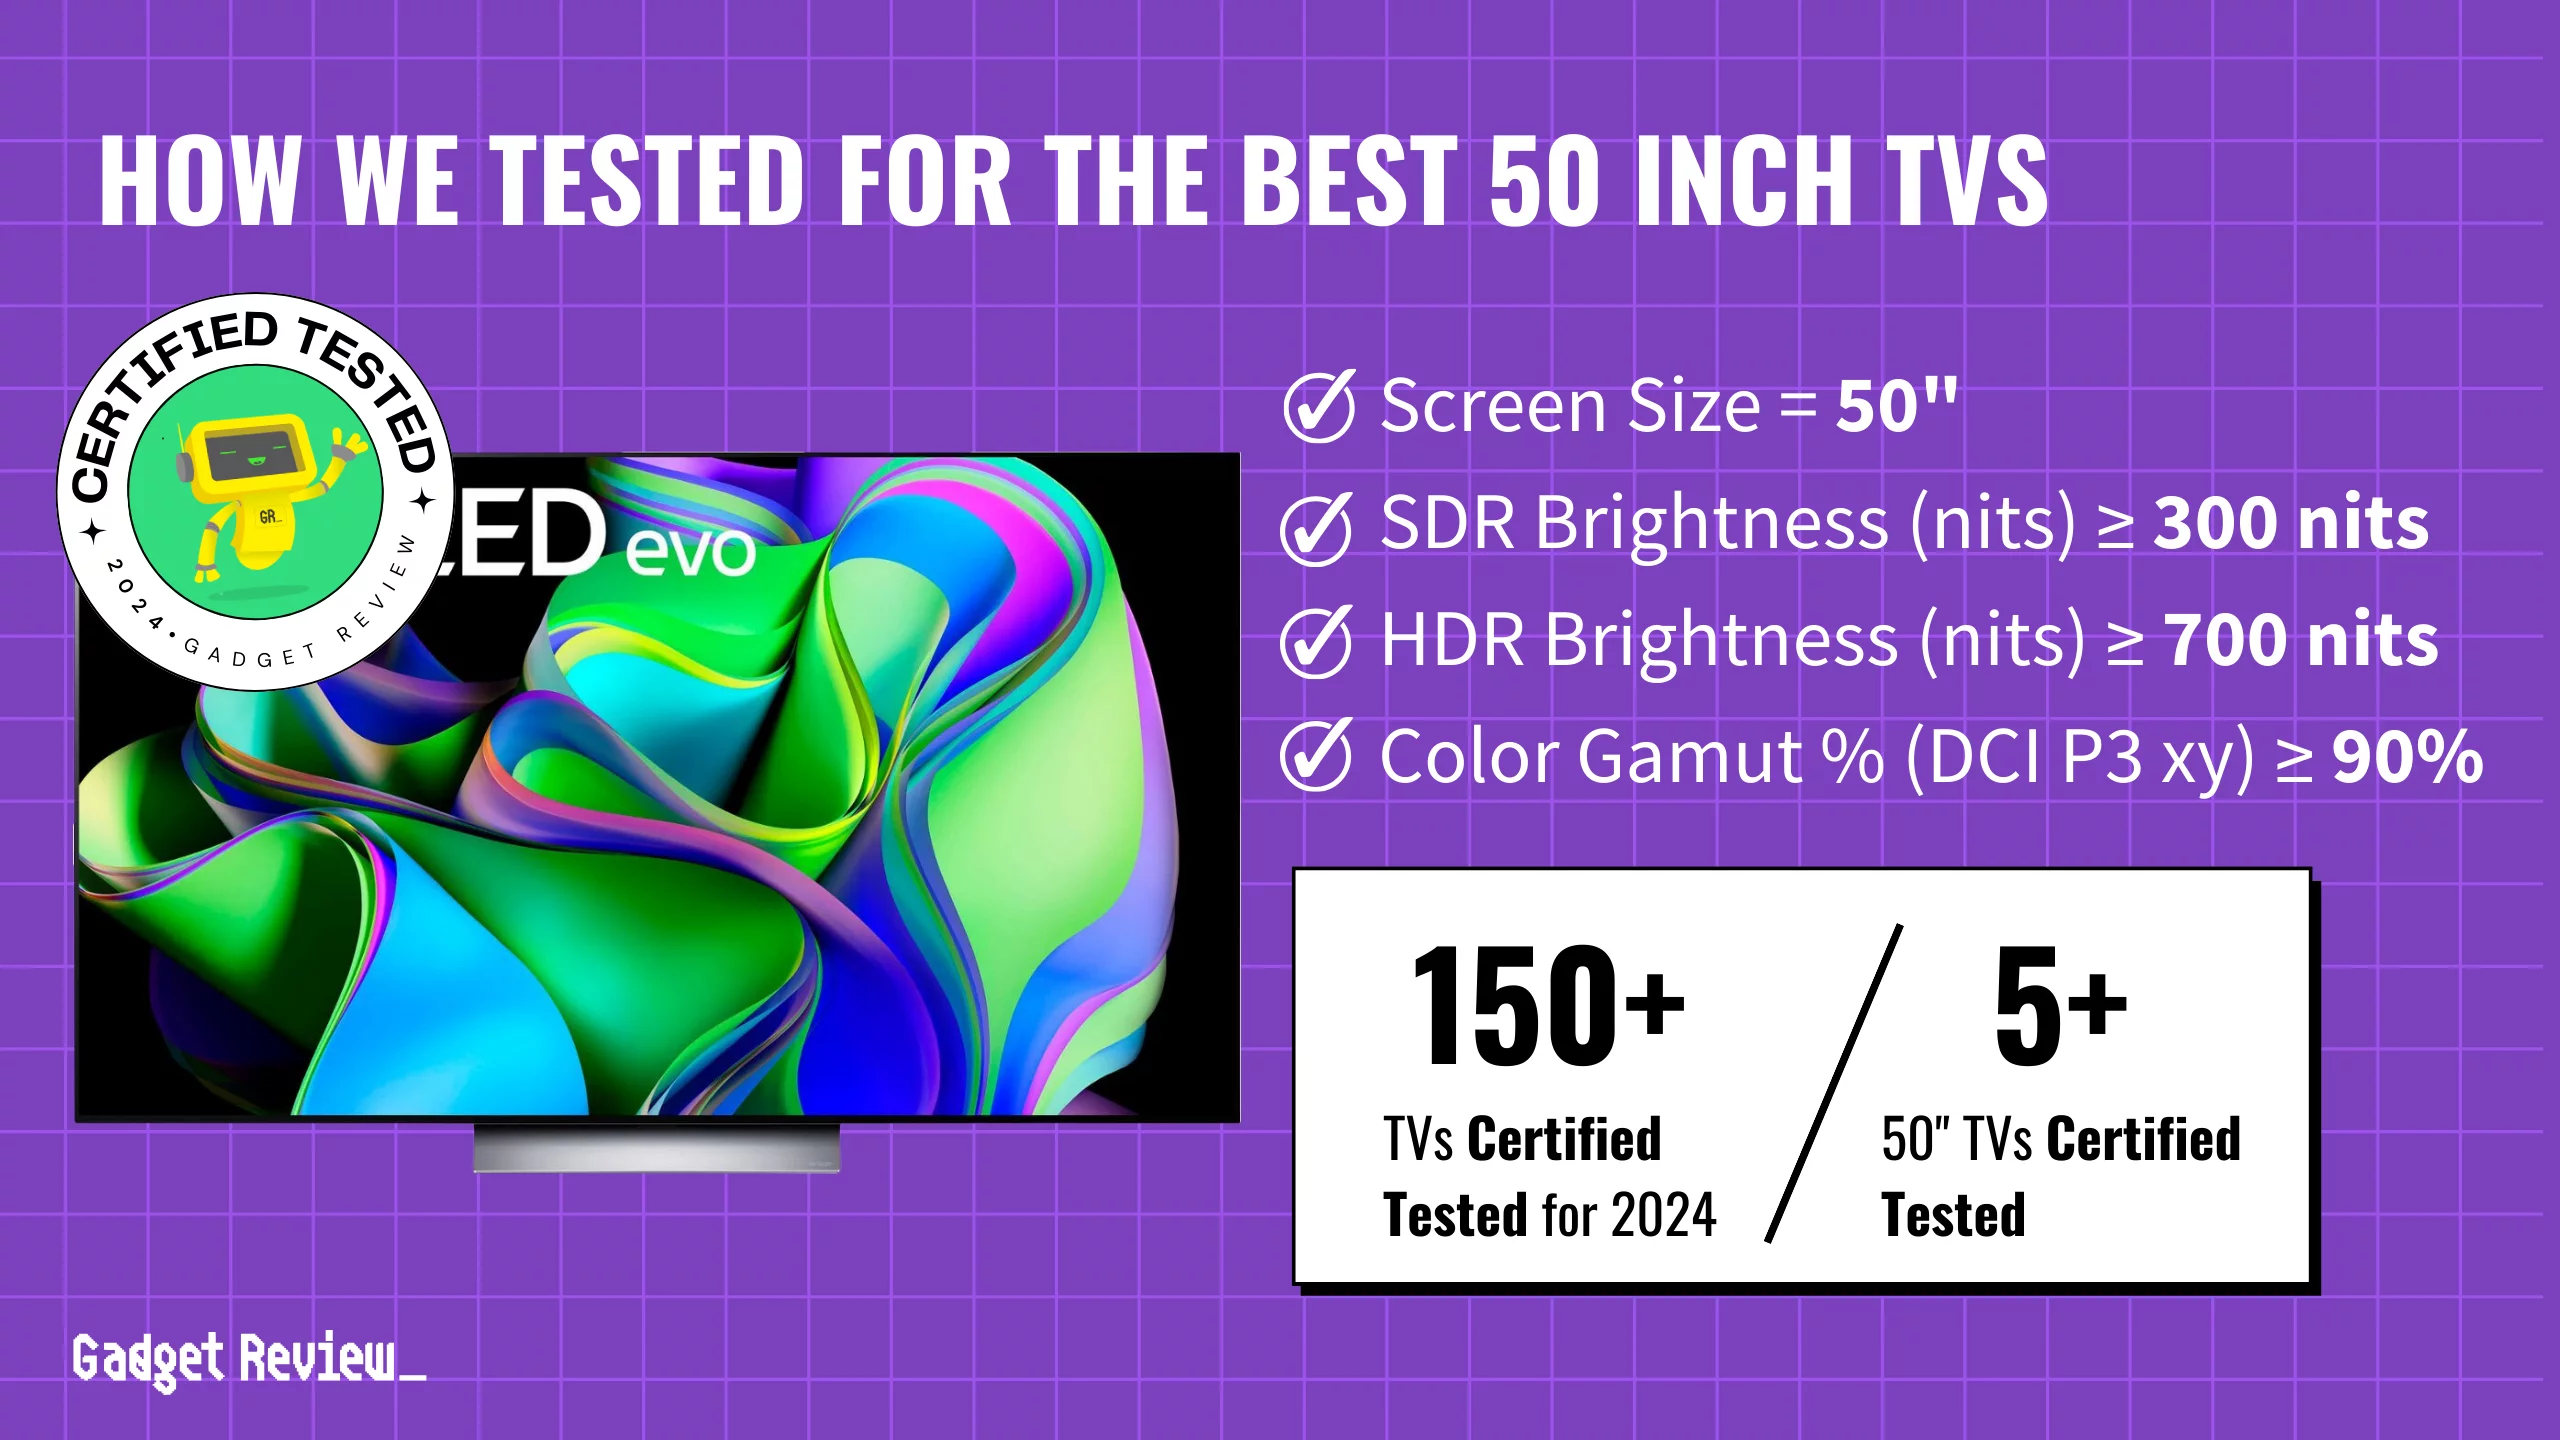 We Ranked The 3 Best 50 Inch TVs